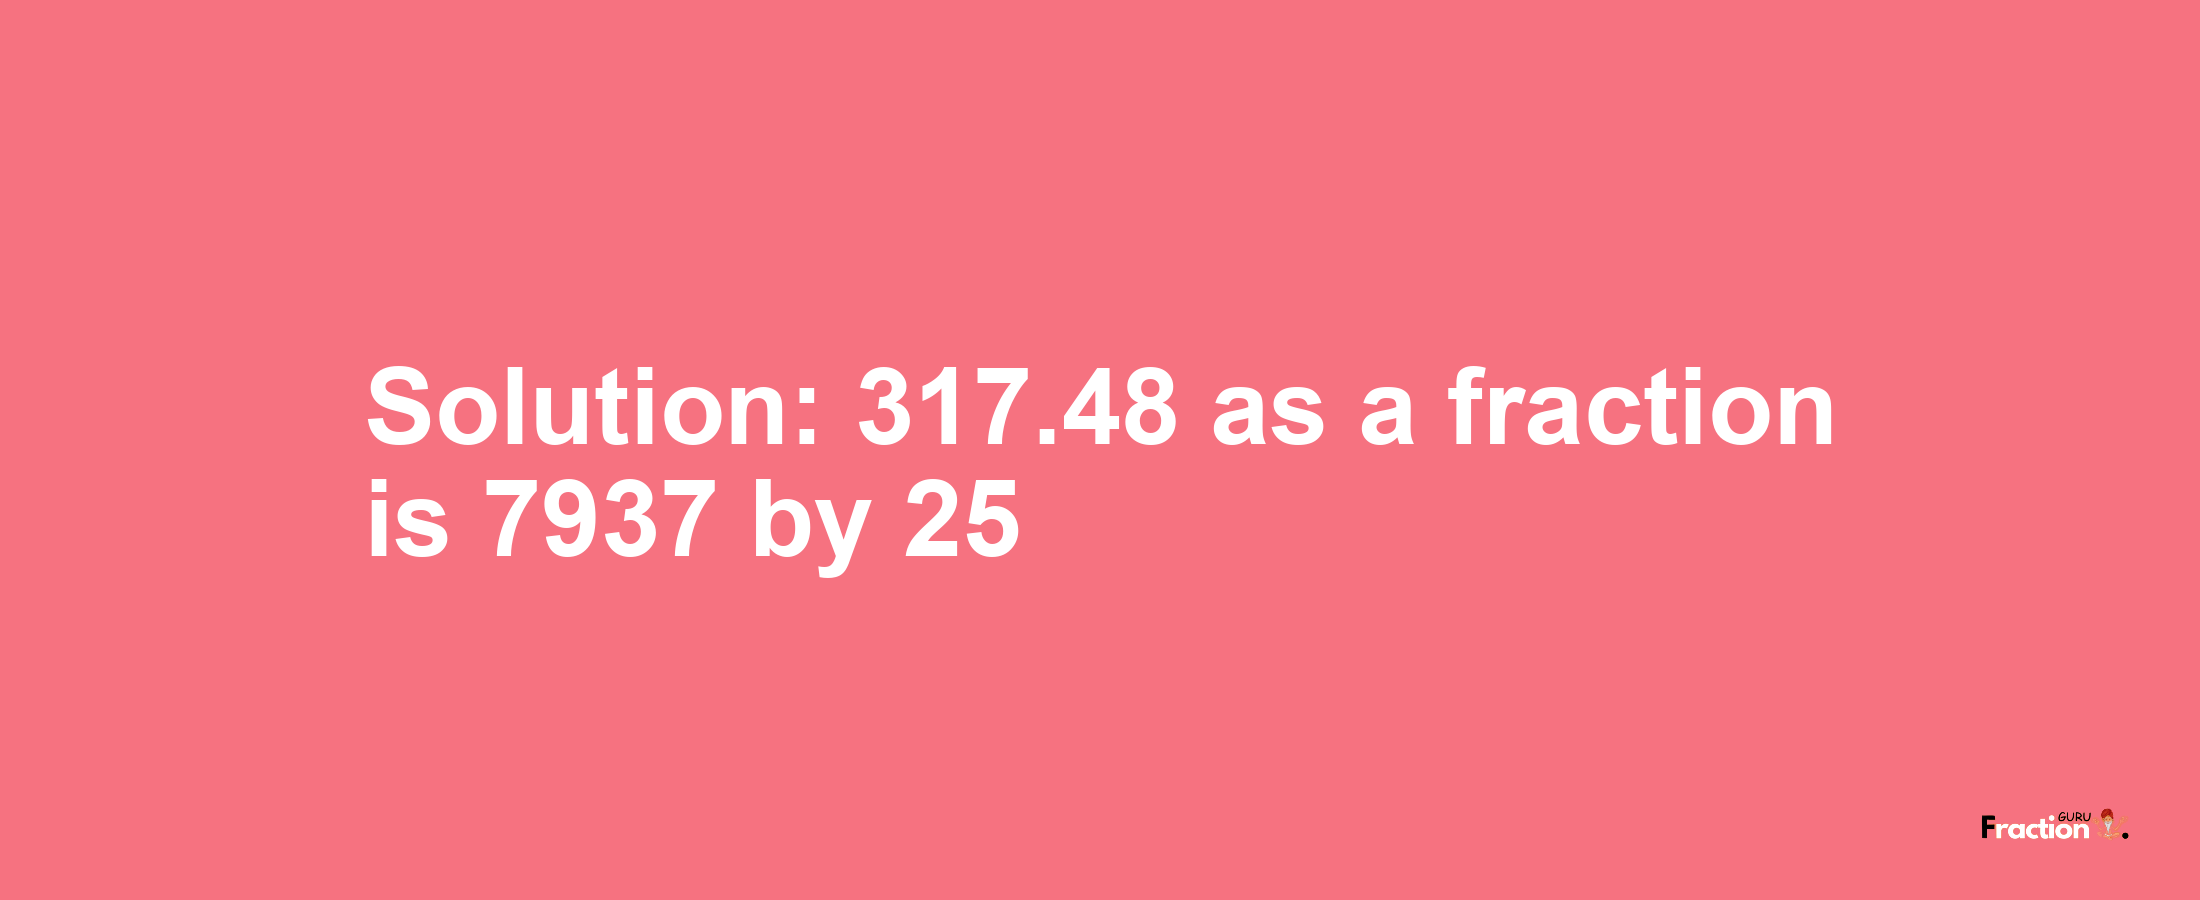 Solution:317.48 as a fraction is 7937/25